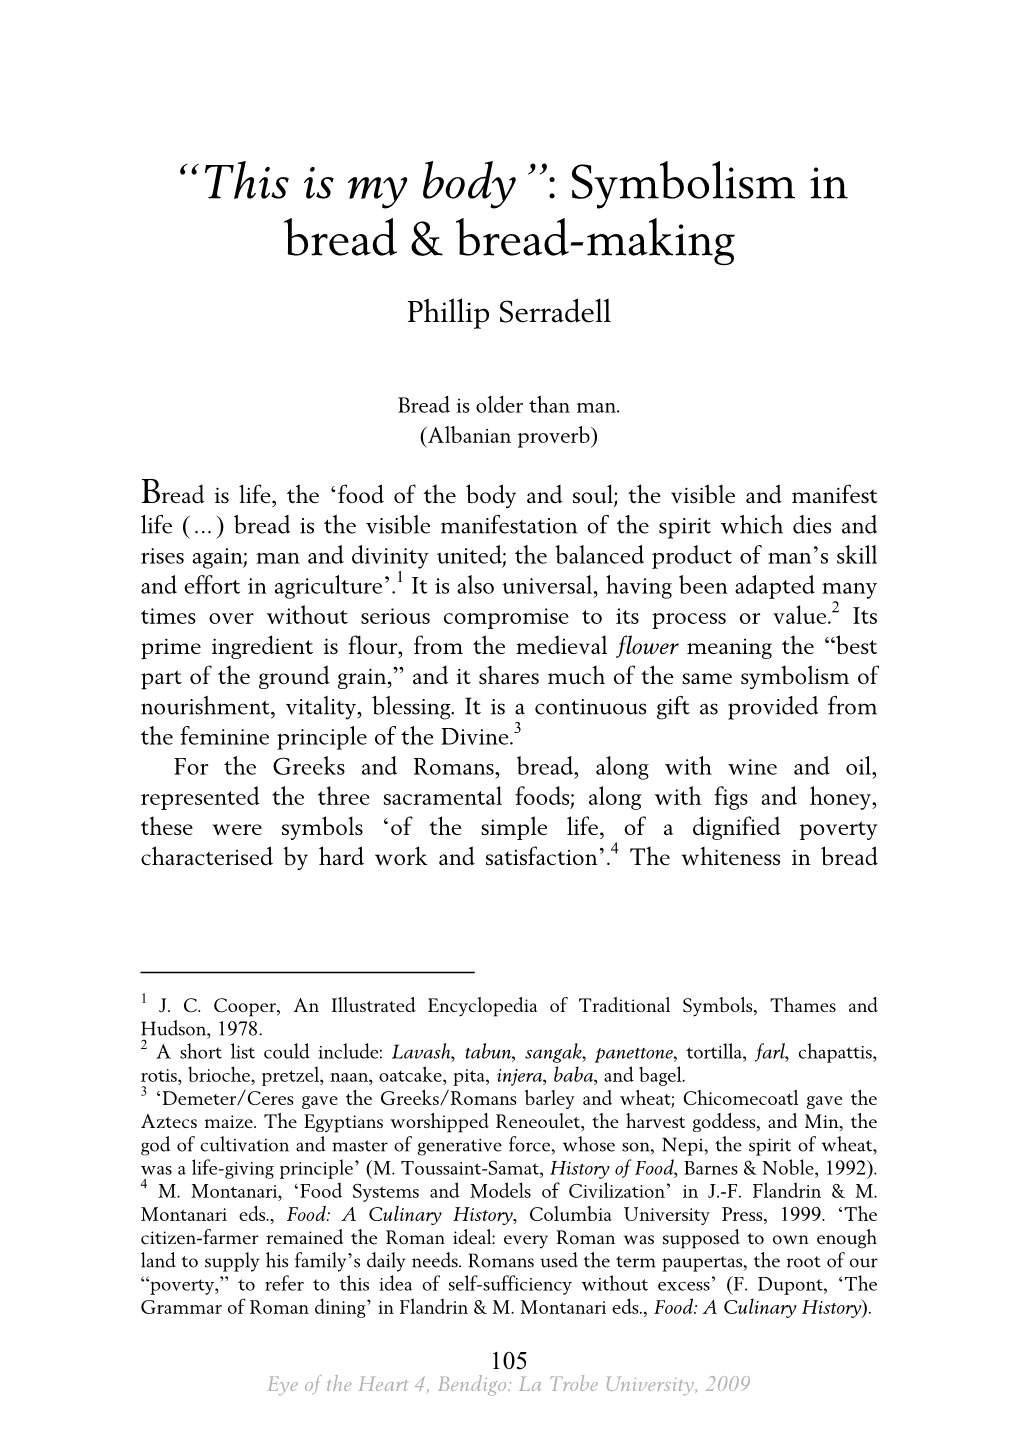 This Is My Body”: Symbolism in Bread & Bread-Making